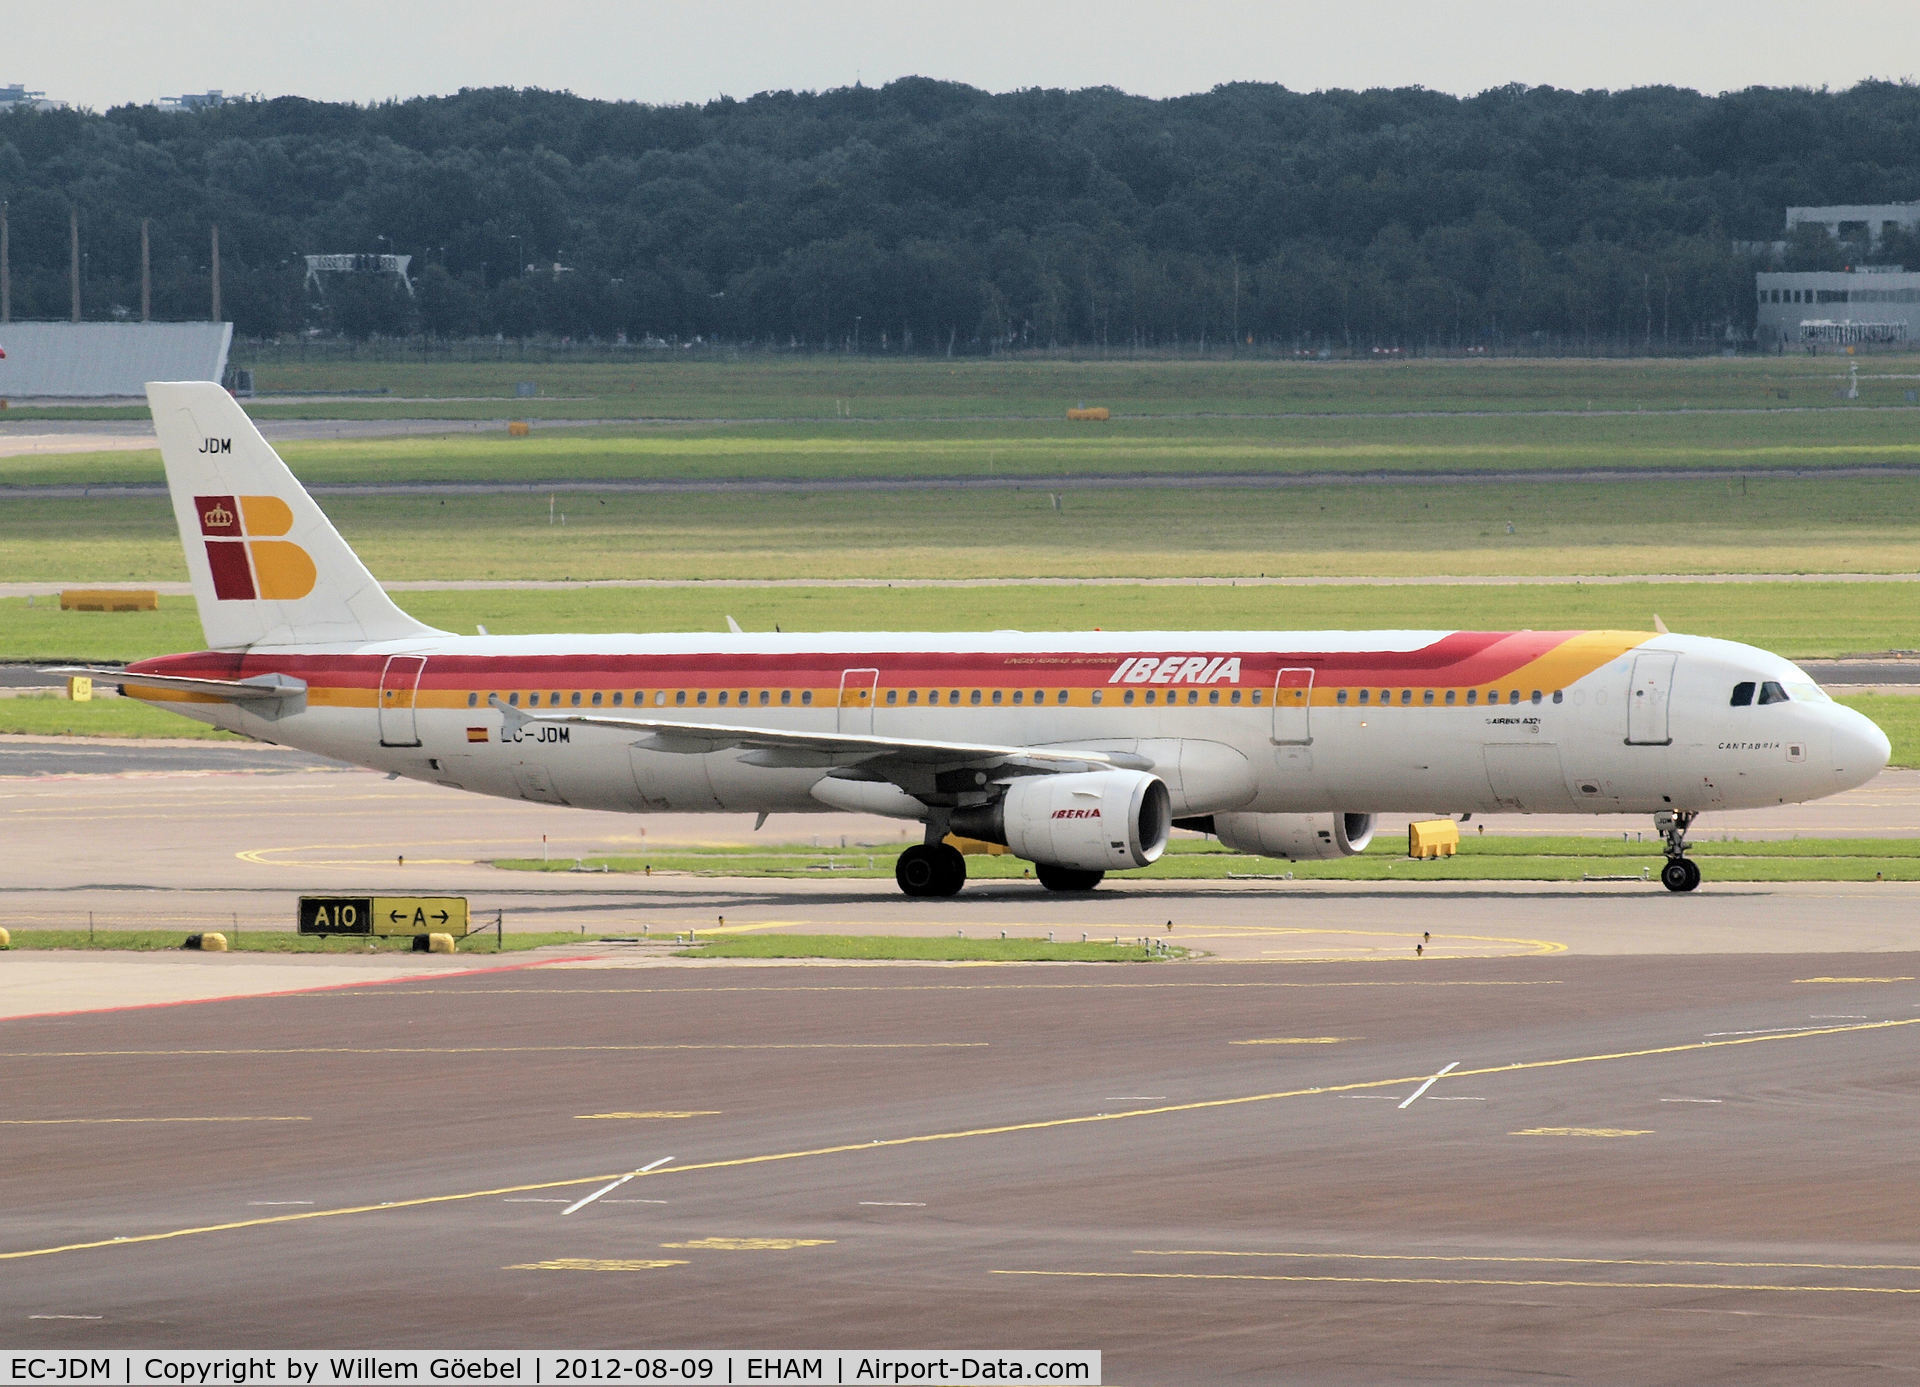 EC-JDM, 2004 Airbus A321-211 C/N 2357, Taxi to the gate of Schiphol Airport